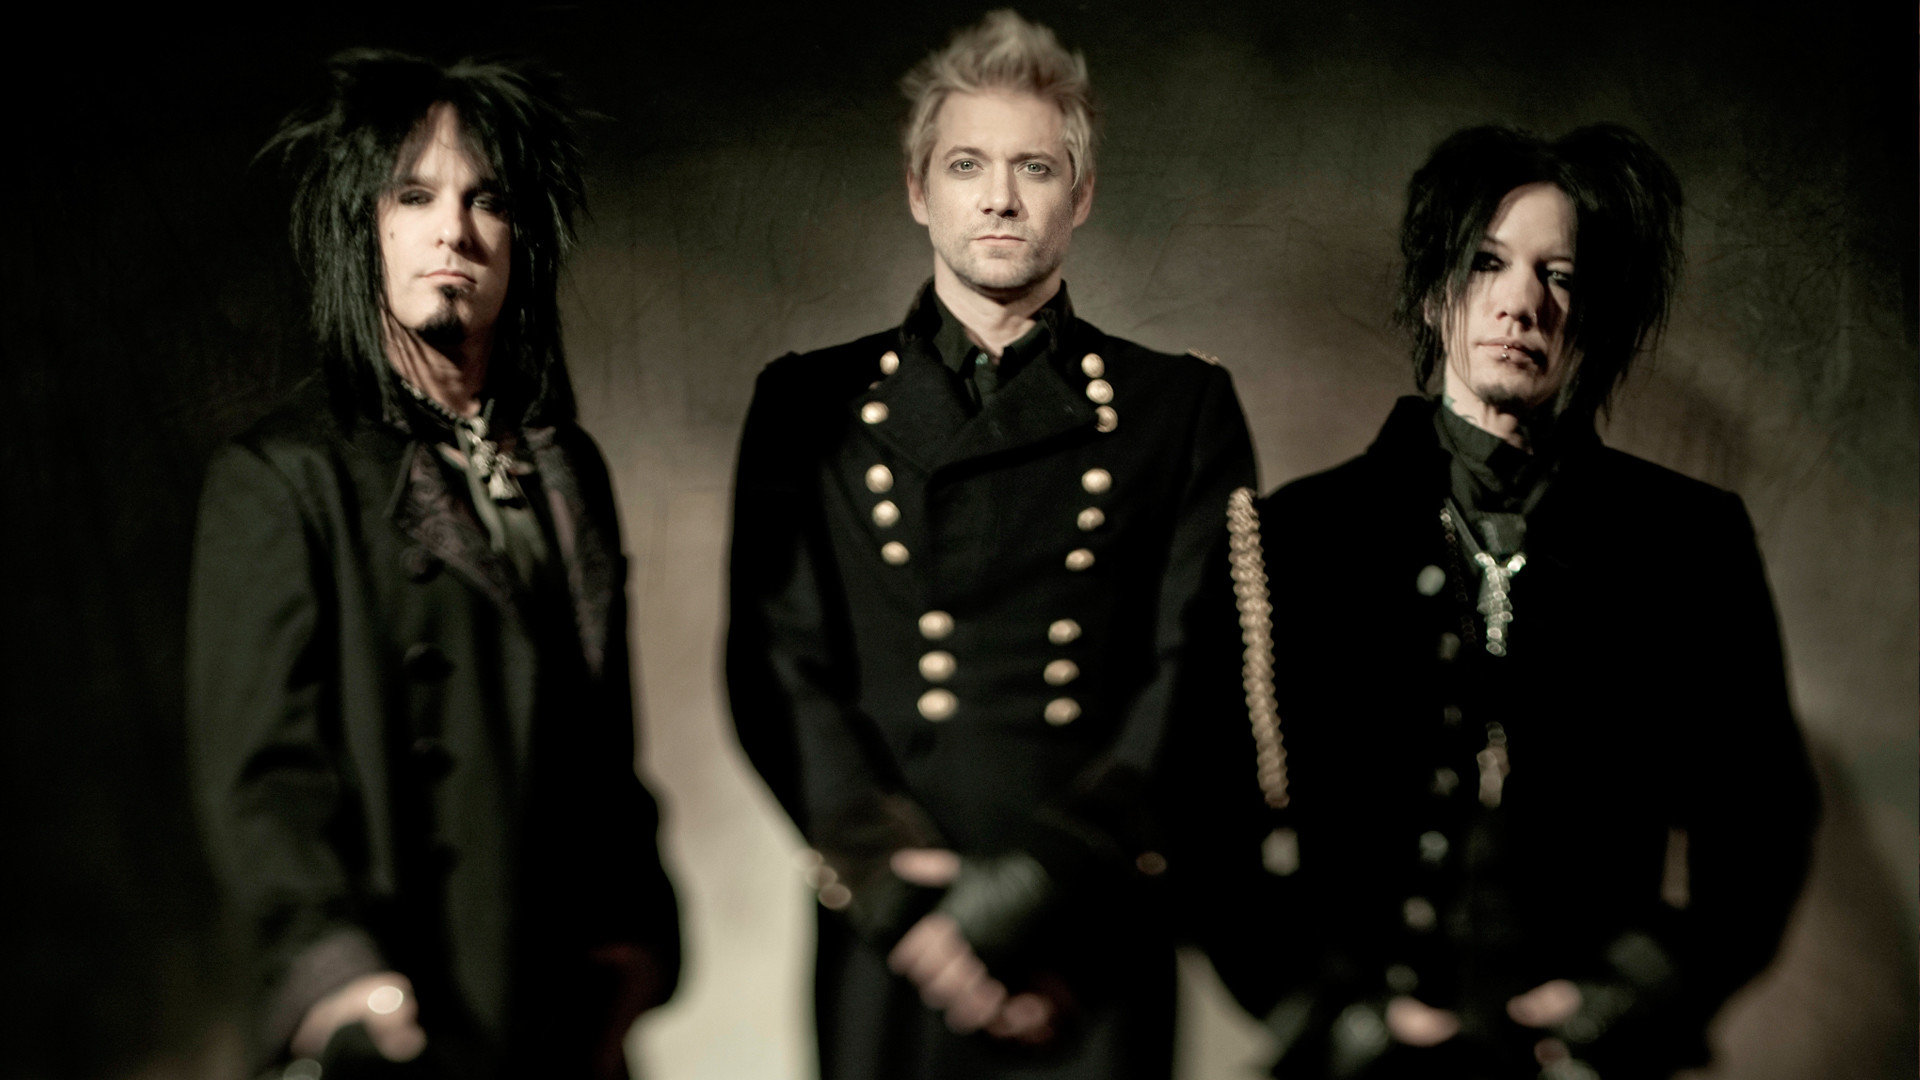 1920x1080 Sixx:am - Bands, Images metal Sixx:am - Bands Metal bands pictures and  photos - Metalship Wallpapers